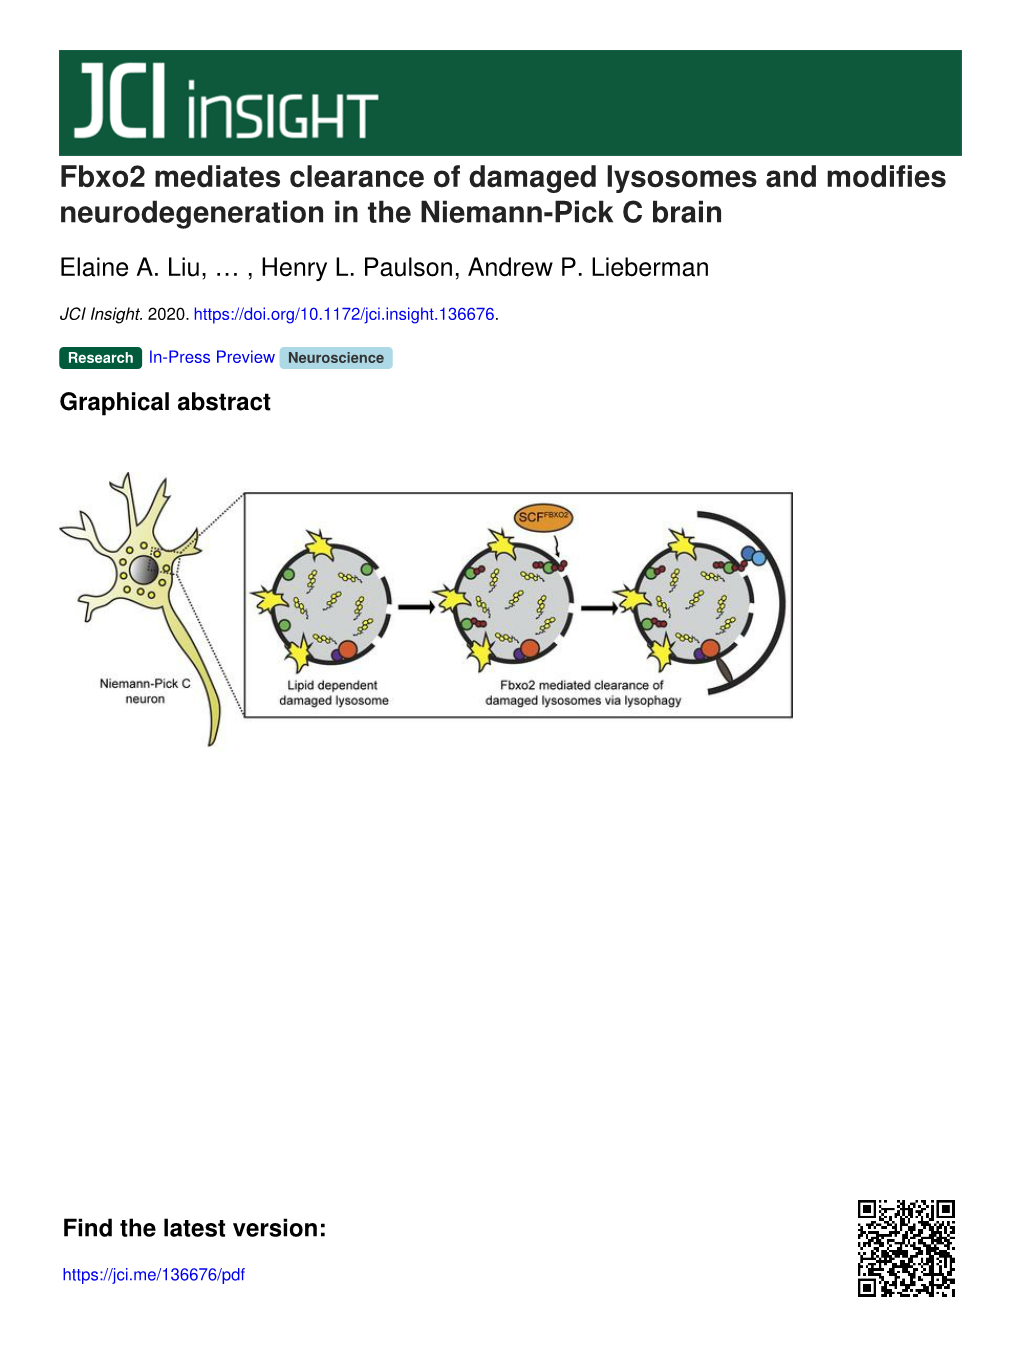 Fbxo2 Mediates Clearance of Damaged Lysosomes and Modifies Neurodegeneration in the Niemann-Pick C Brain